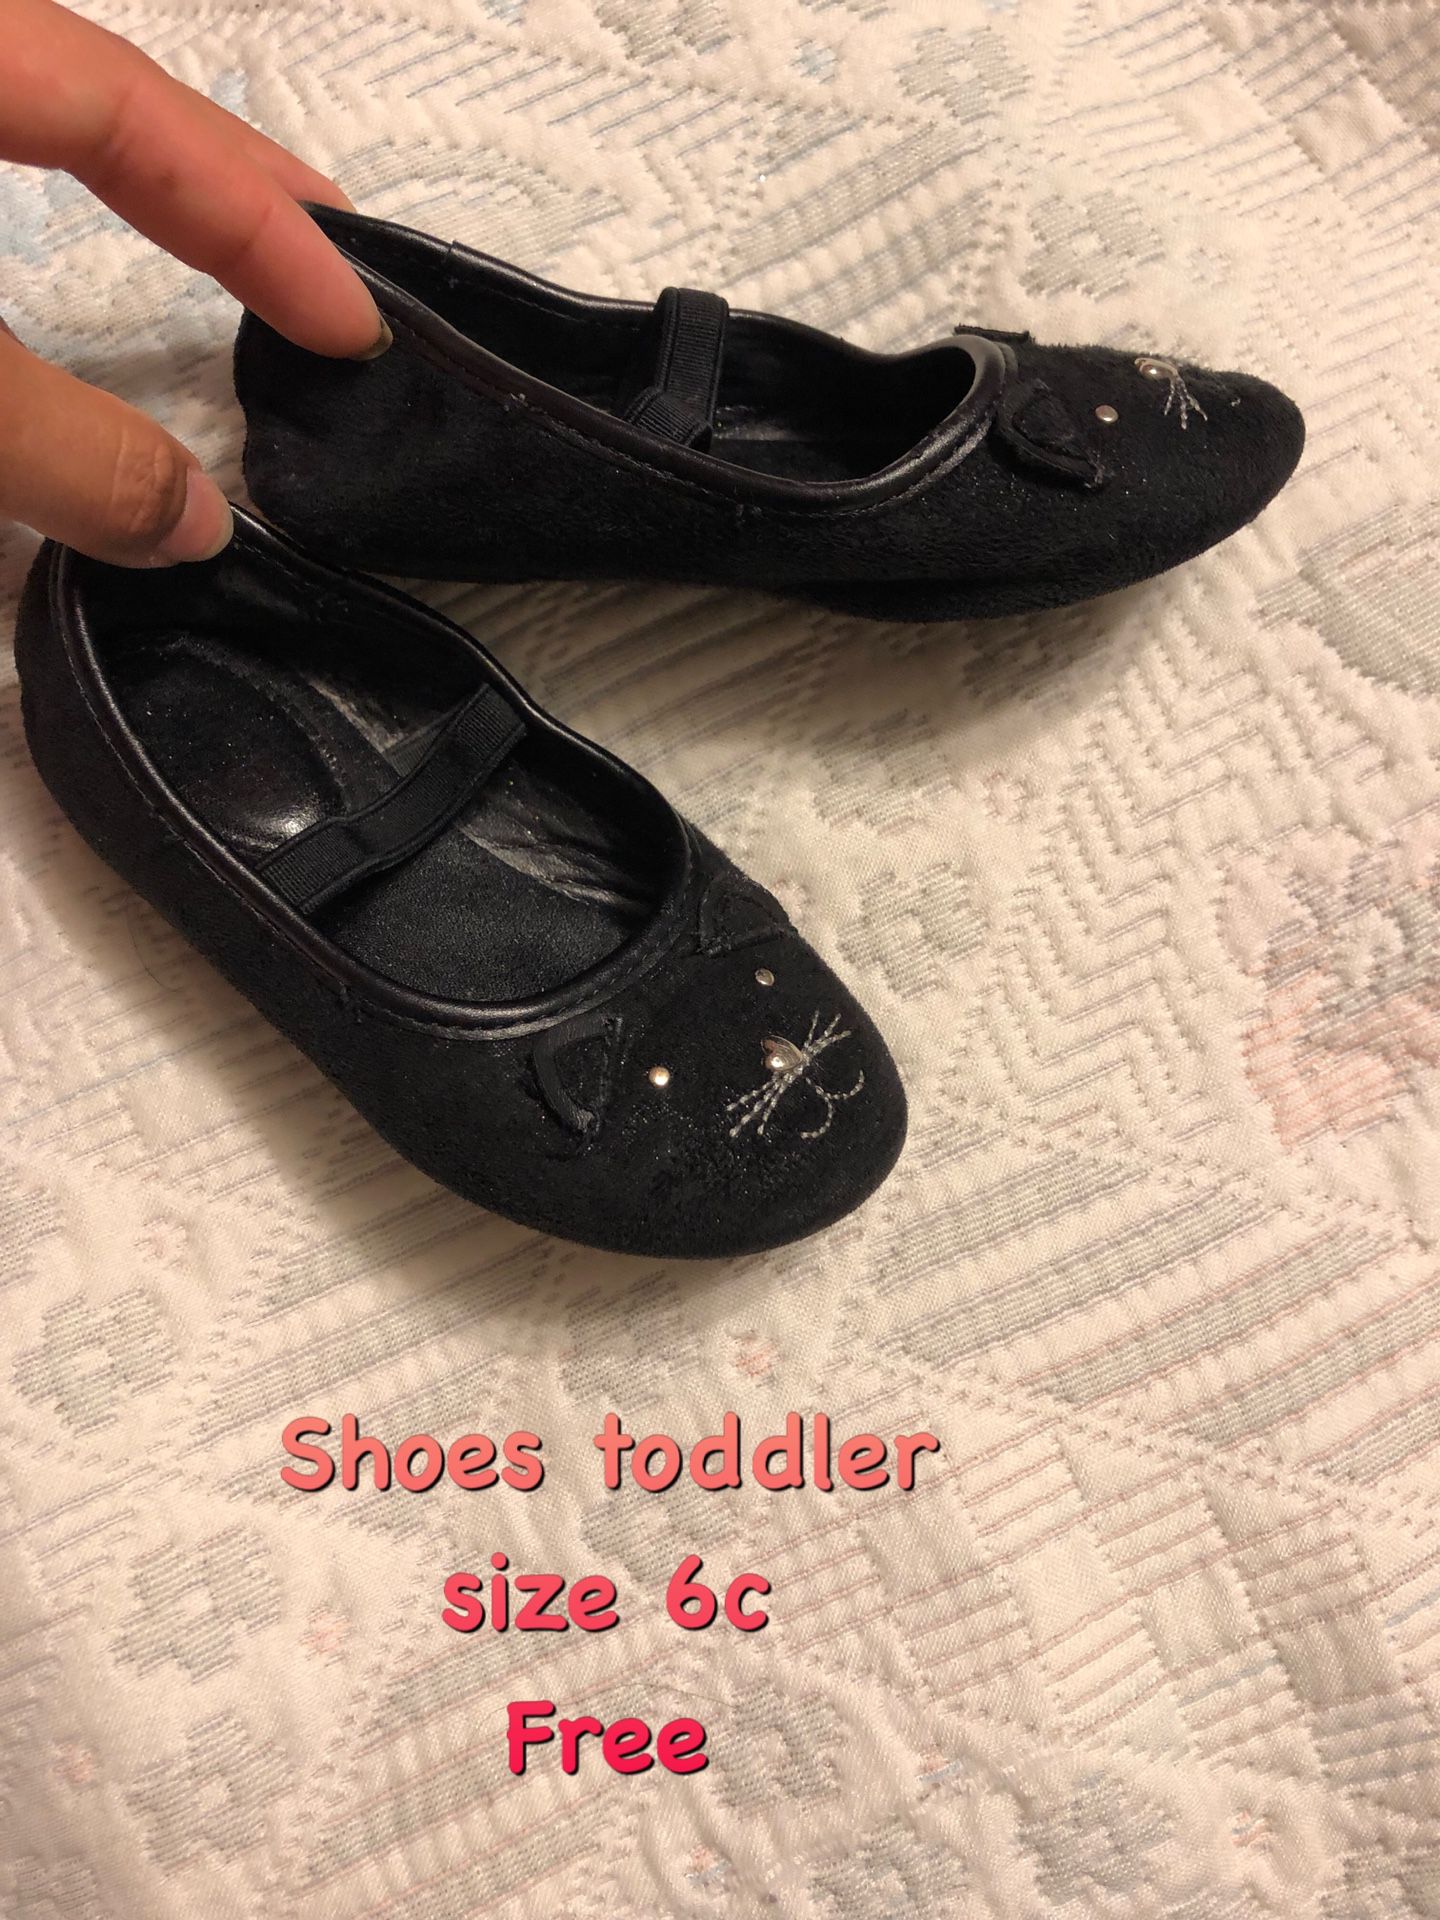 Shoes toddler FREE